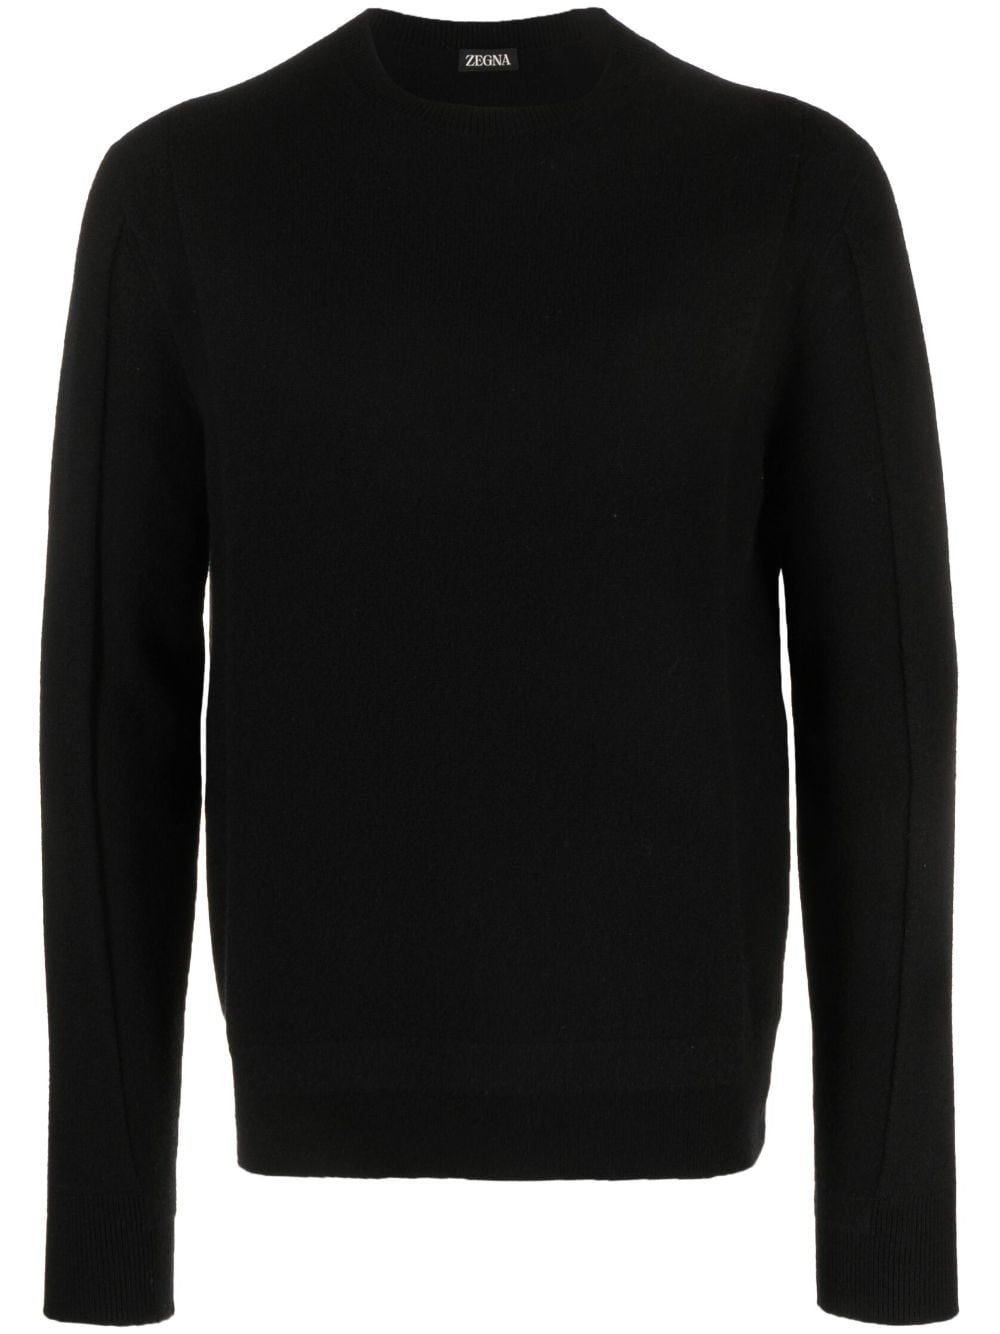 Zegna Wool And Cashmere Crew Neck Black